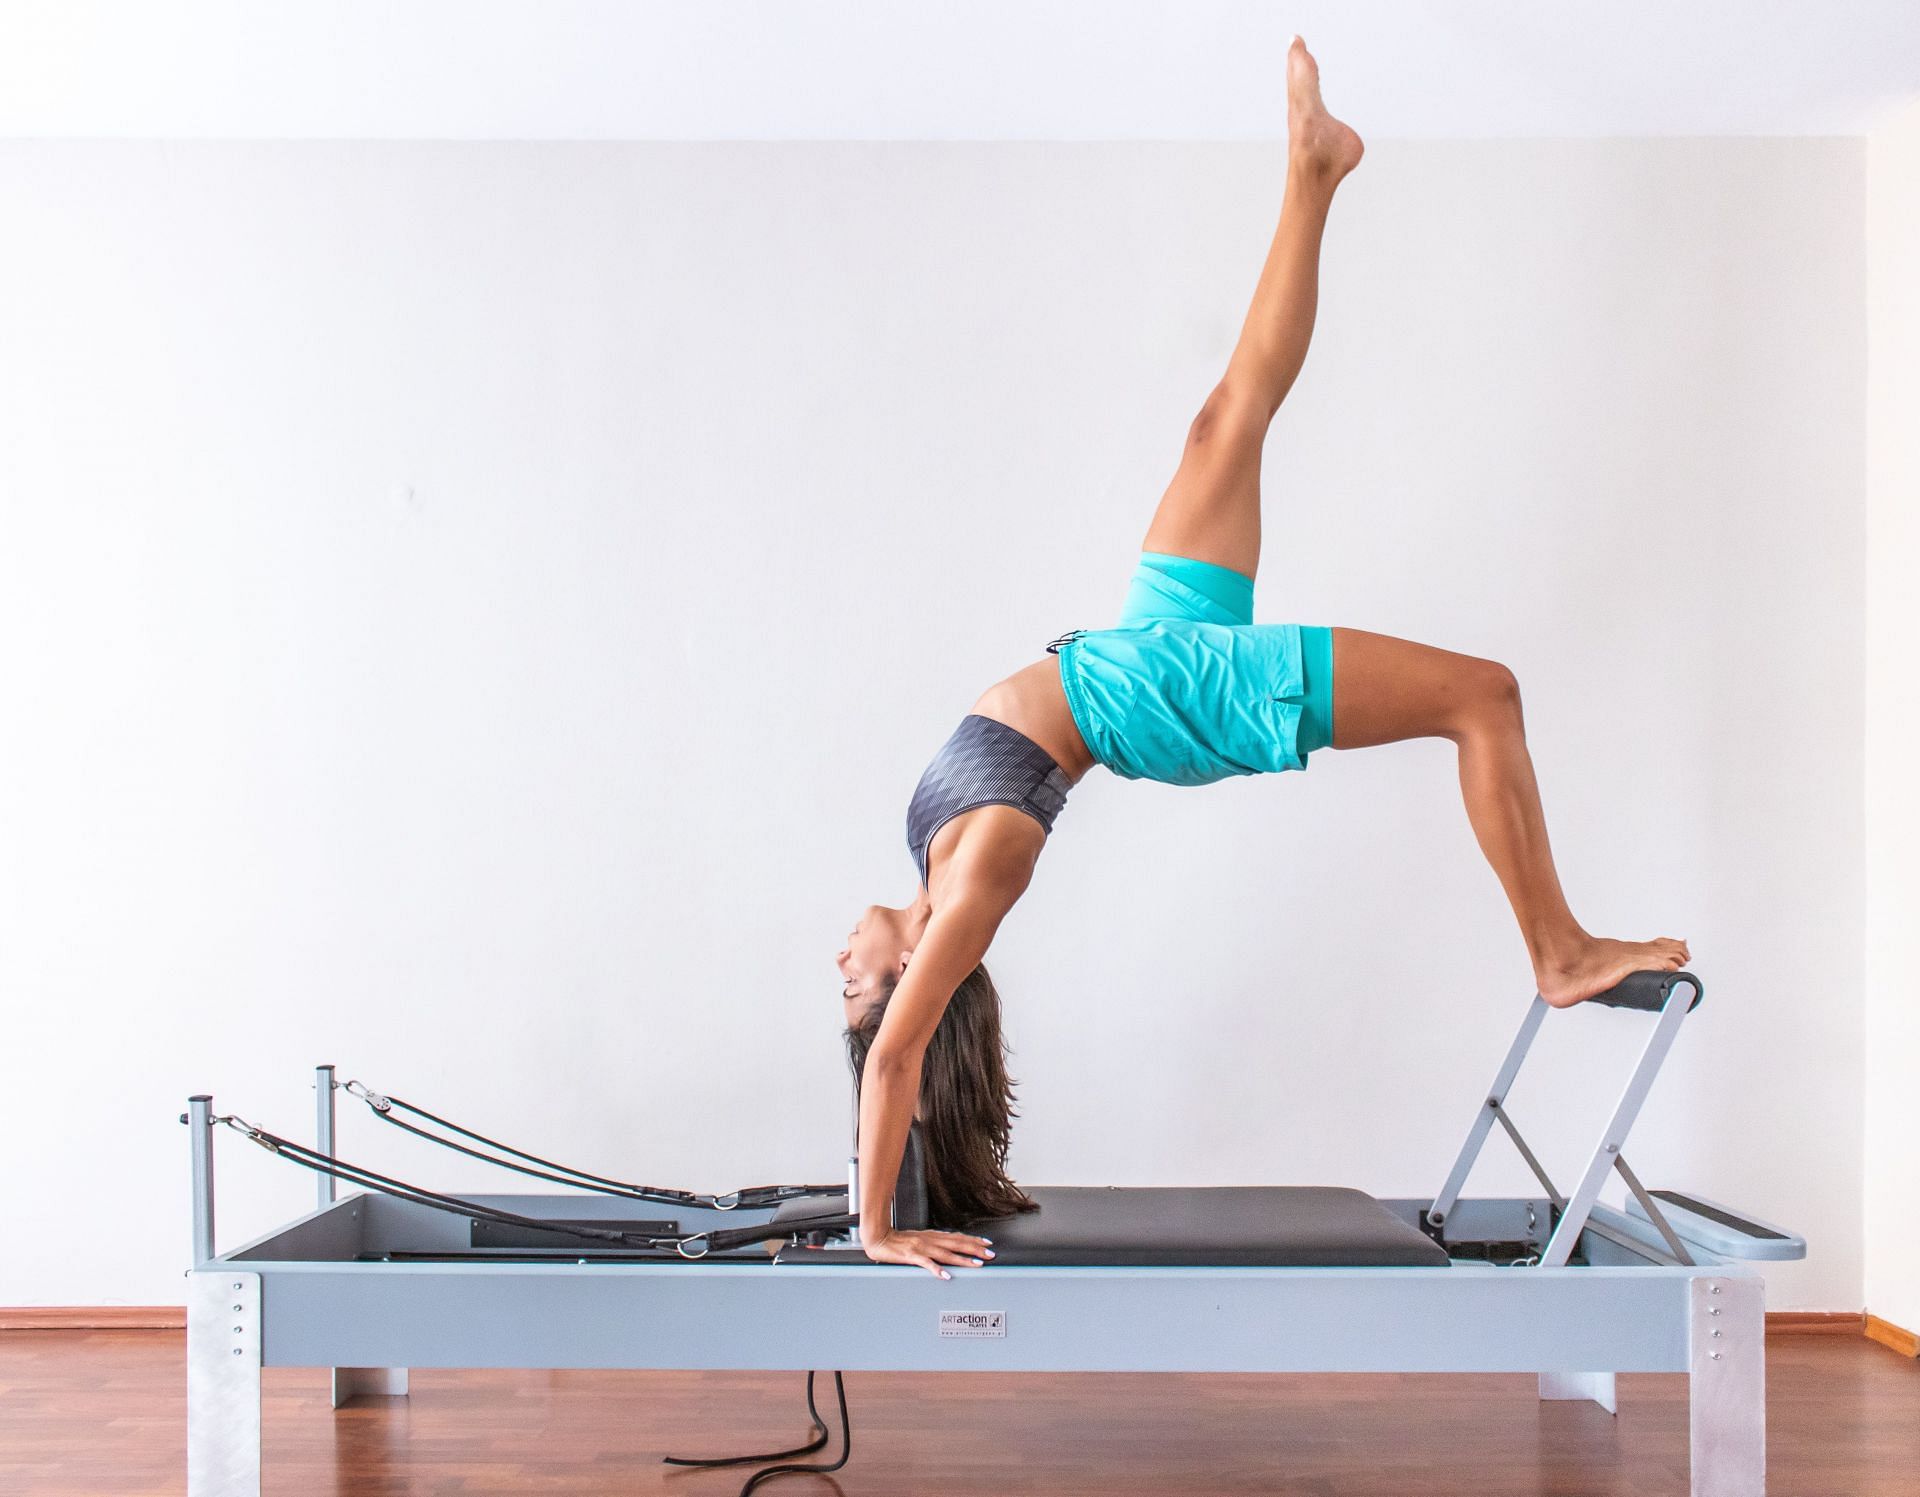 There are a variety of exercises you can perform on the reformer (Image via Pexels/Maria Charizani)